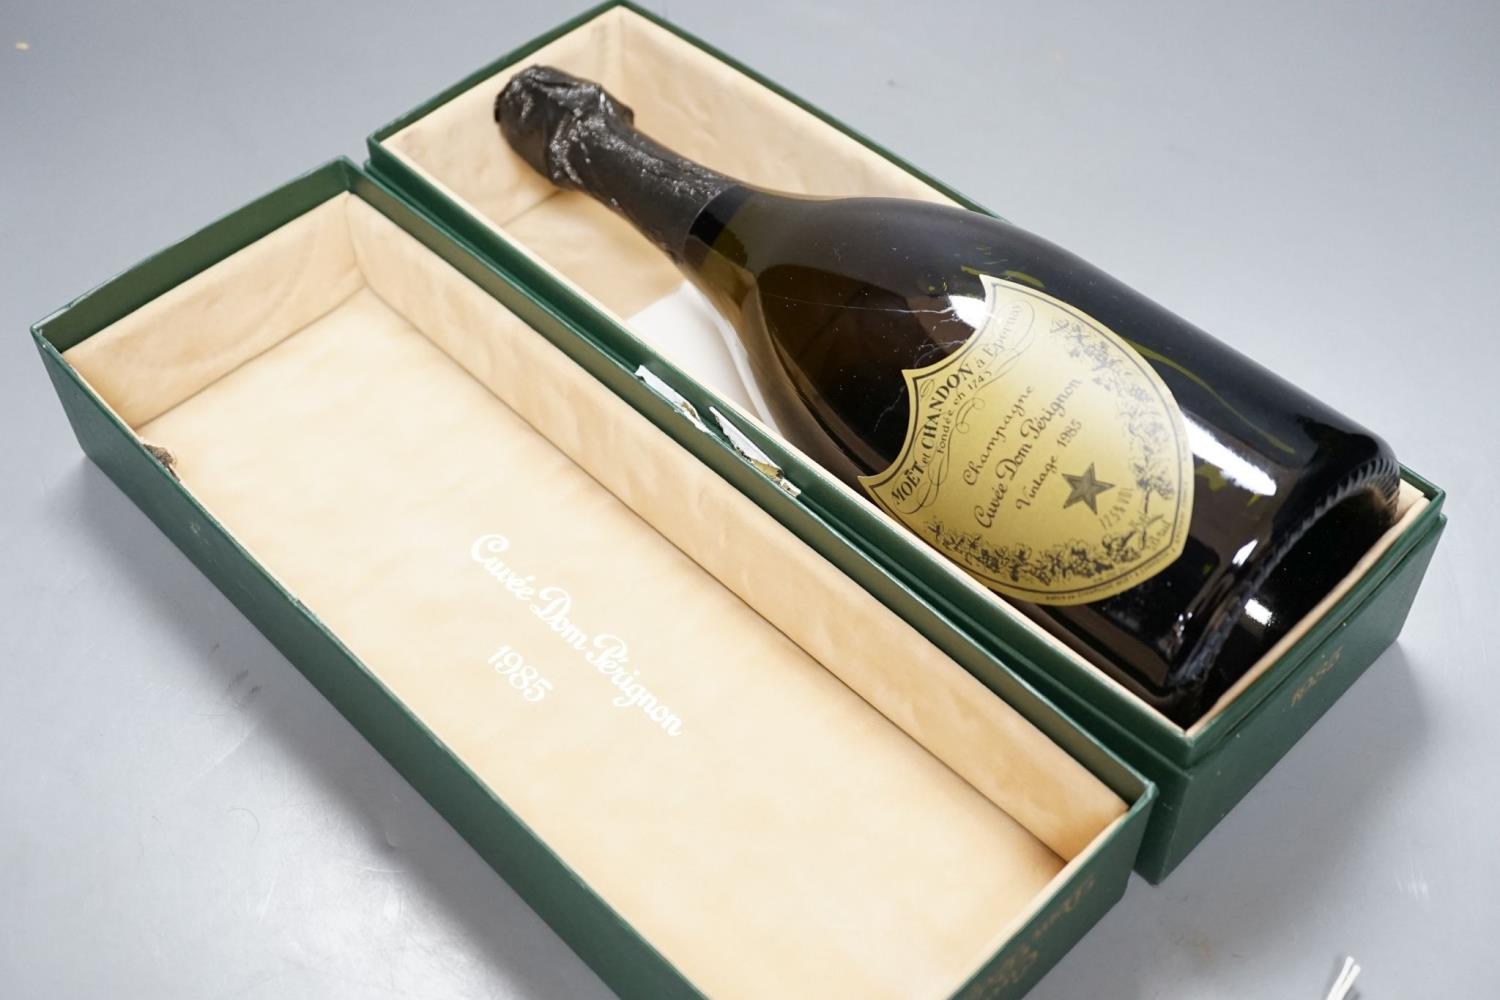 A single cased bottle of Dom Perignon, 1985 - Image 3 of 4